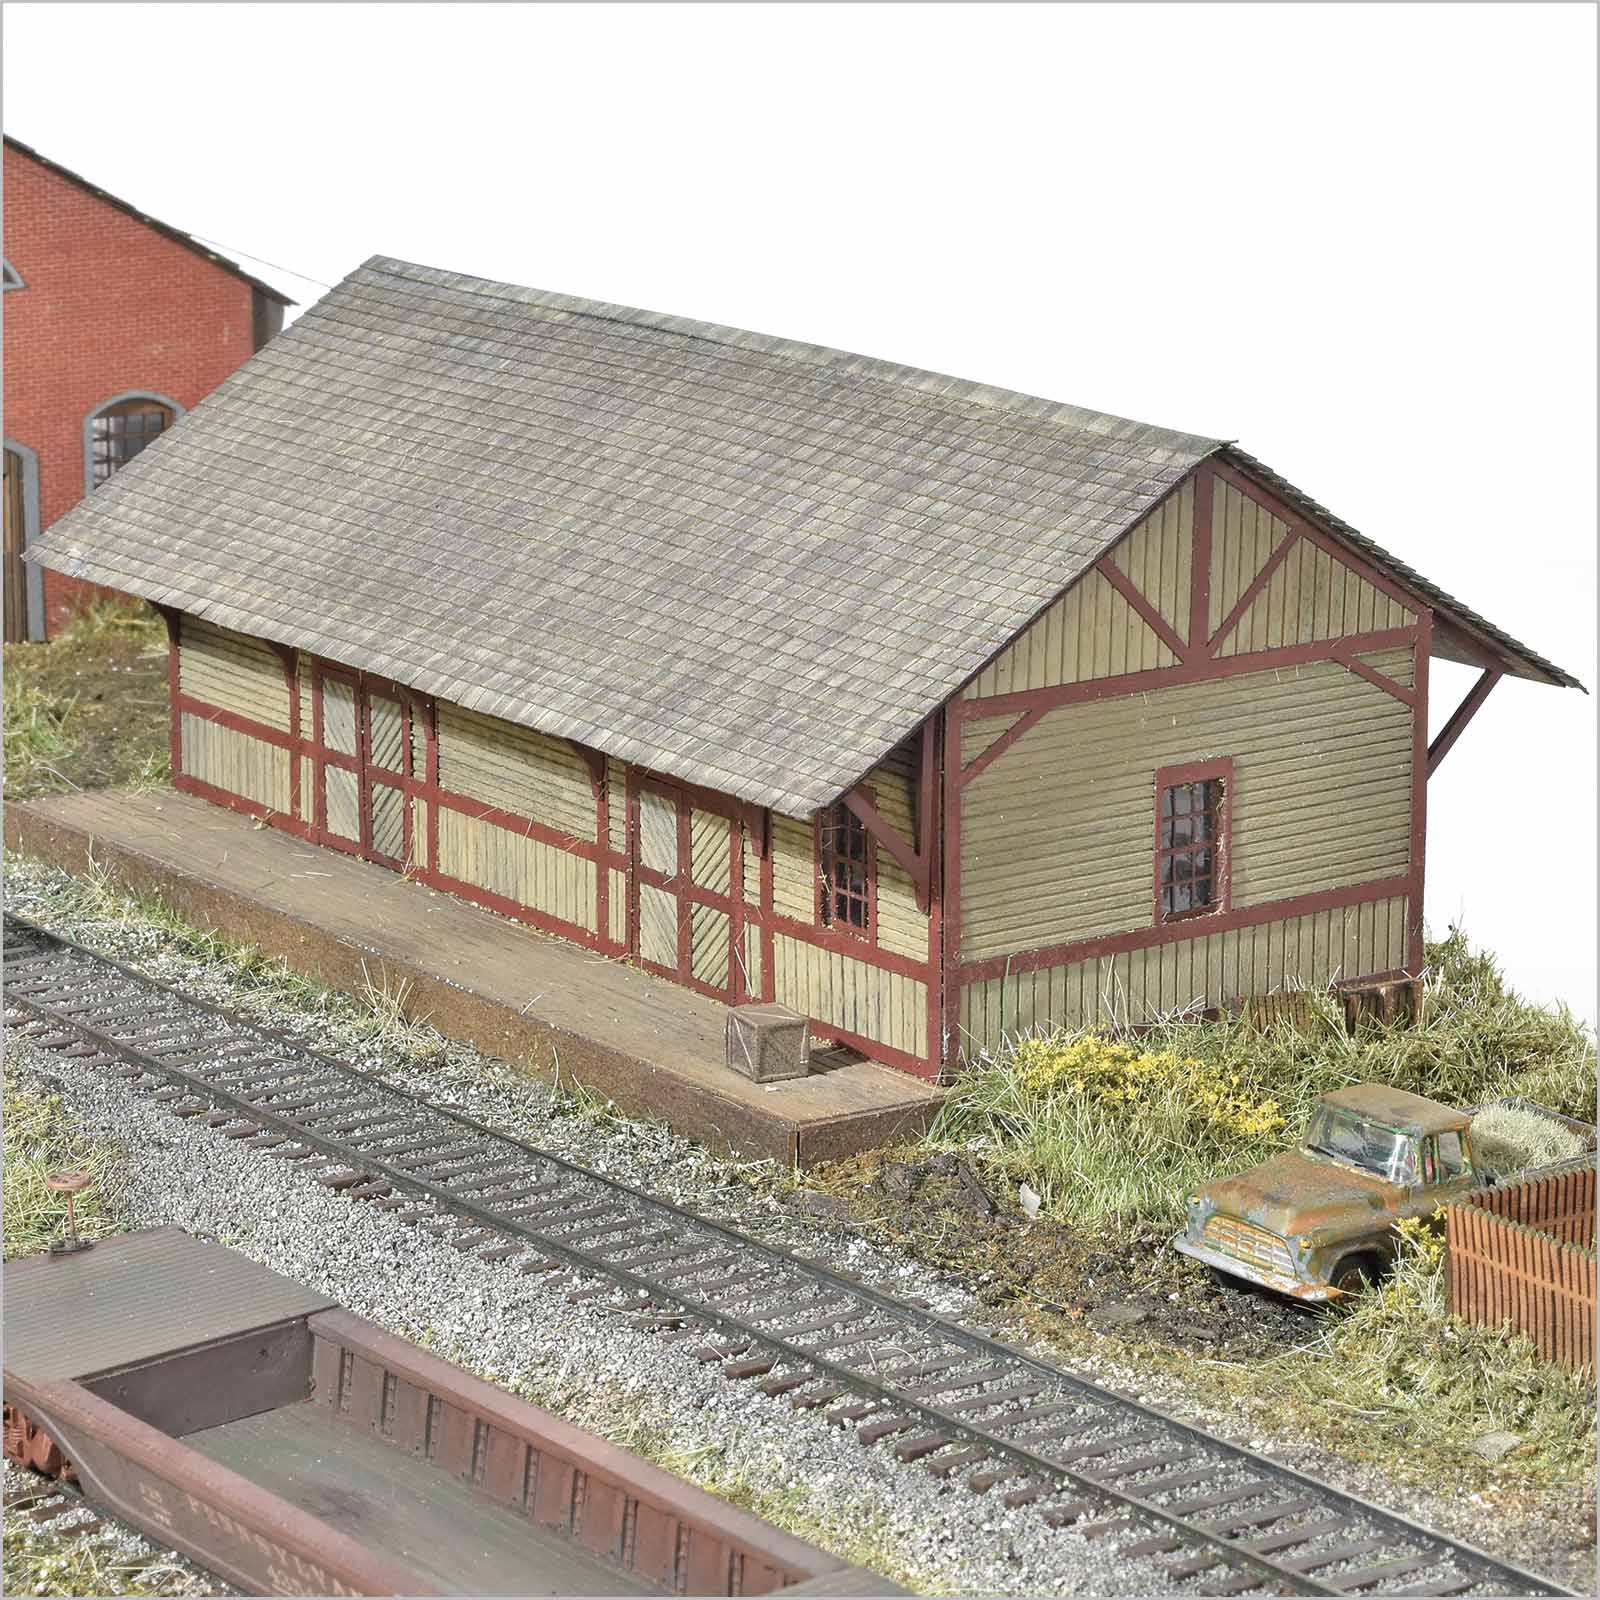 Standard Pennsylvania Railroad Freight Station, HO Scale, by Scientific - Micro - Mark Laser Model Kits